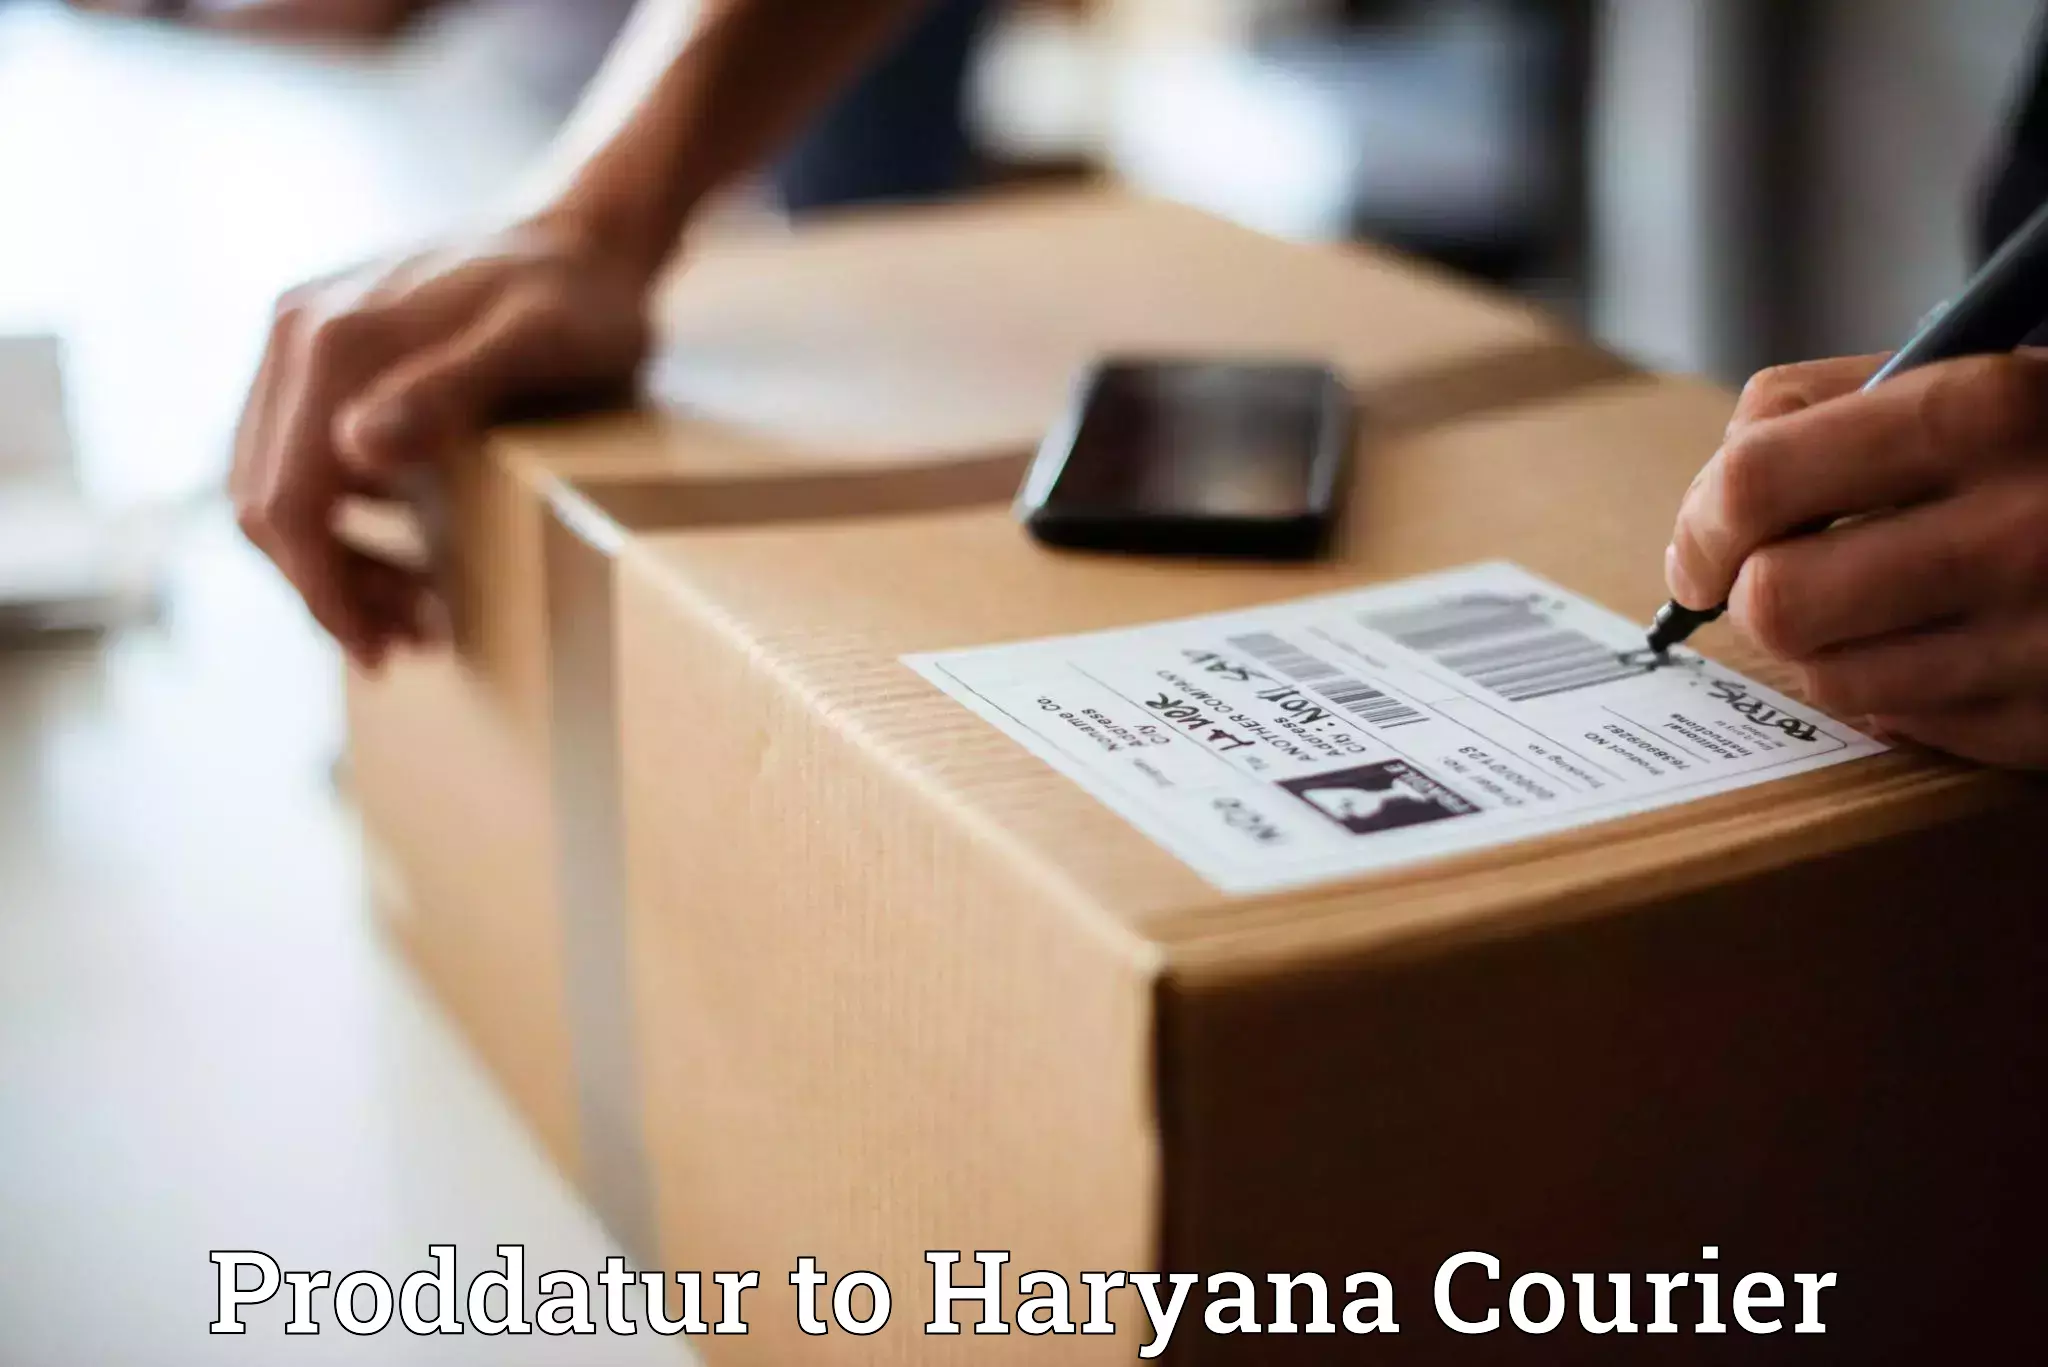 Next-day delivery options Proddatur to Narwana